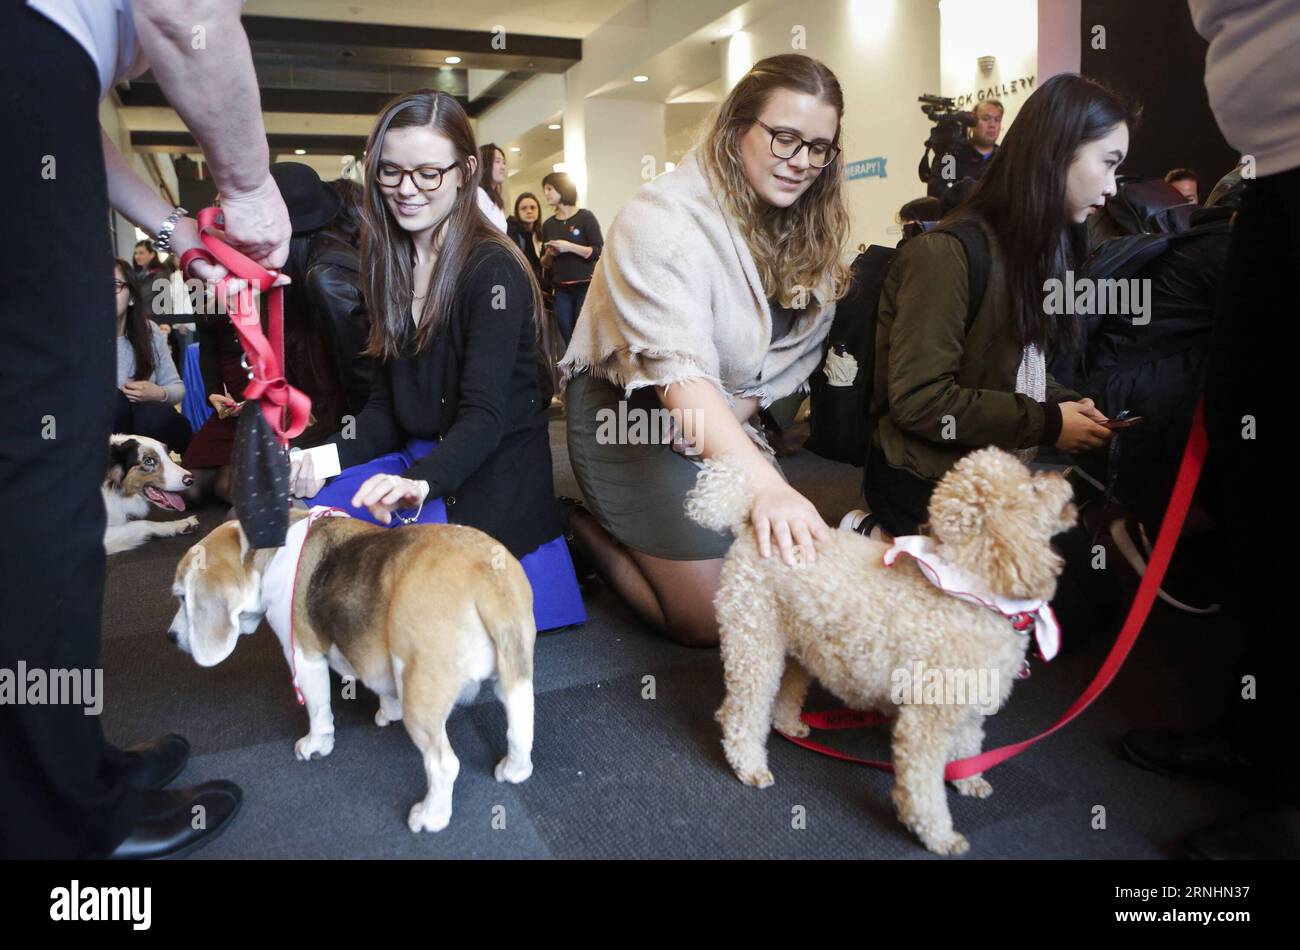 (161130) -- VANCOUVER, Nov. 30, 2016 -- Students play with dogs during the puppy therapy event at Simon Fraser University in Vancouver, Canada, Nov. 29, 2016. Simon Fraser University invited puppies to campus during exam time to help students take a break from the stress of end-of-term assignments. )(gj) CANADA-VANCOUVER-PUPPY THERAPY LiangxSen PUBLICATIONxNOTxINxCHN   Vancouver Nov 30 2016 Students Play With Dogs during The Puppy THERAPY Event AT Simon Fraser University in Vancouver Canada Nov 29 2016 Simon Fraser University invited Puppies to Campus during Exam Time to Help Students Take a B Stock Photo